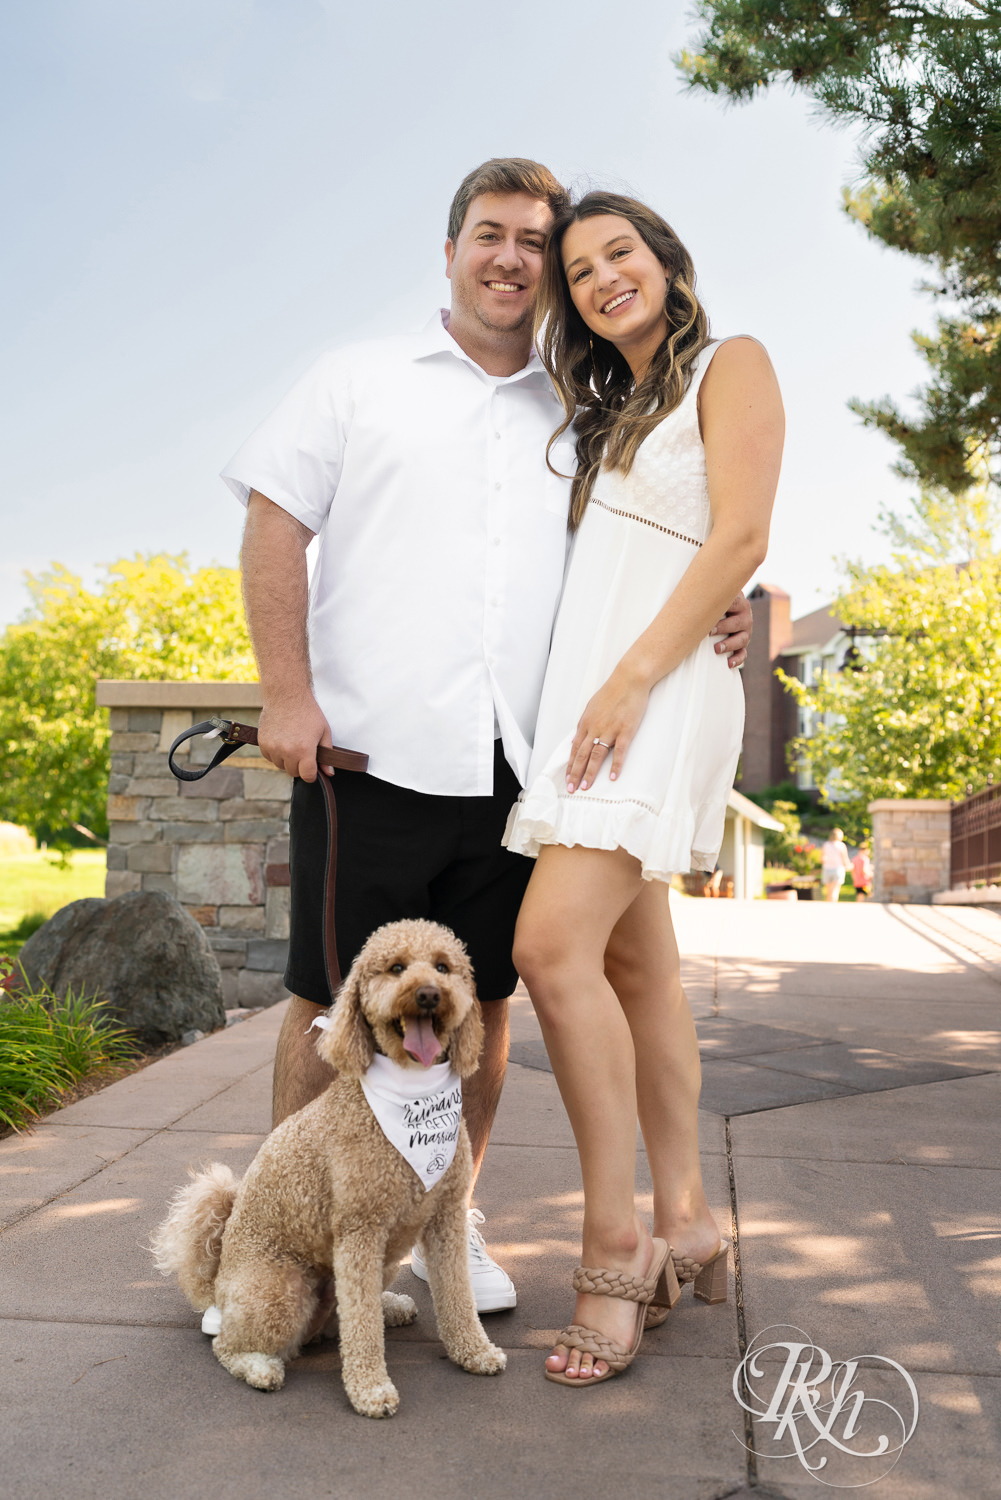 Man and woman in white dress smile with little dog during engagement photography at Centennial Lakes Park in Edina, Minnesota.